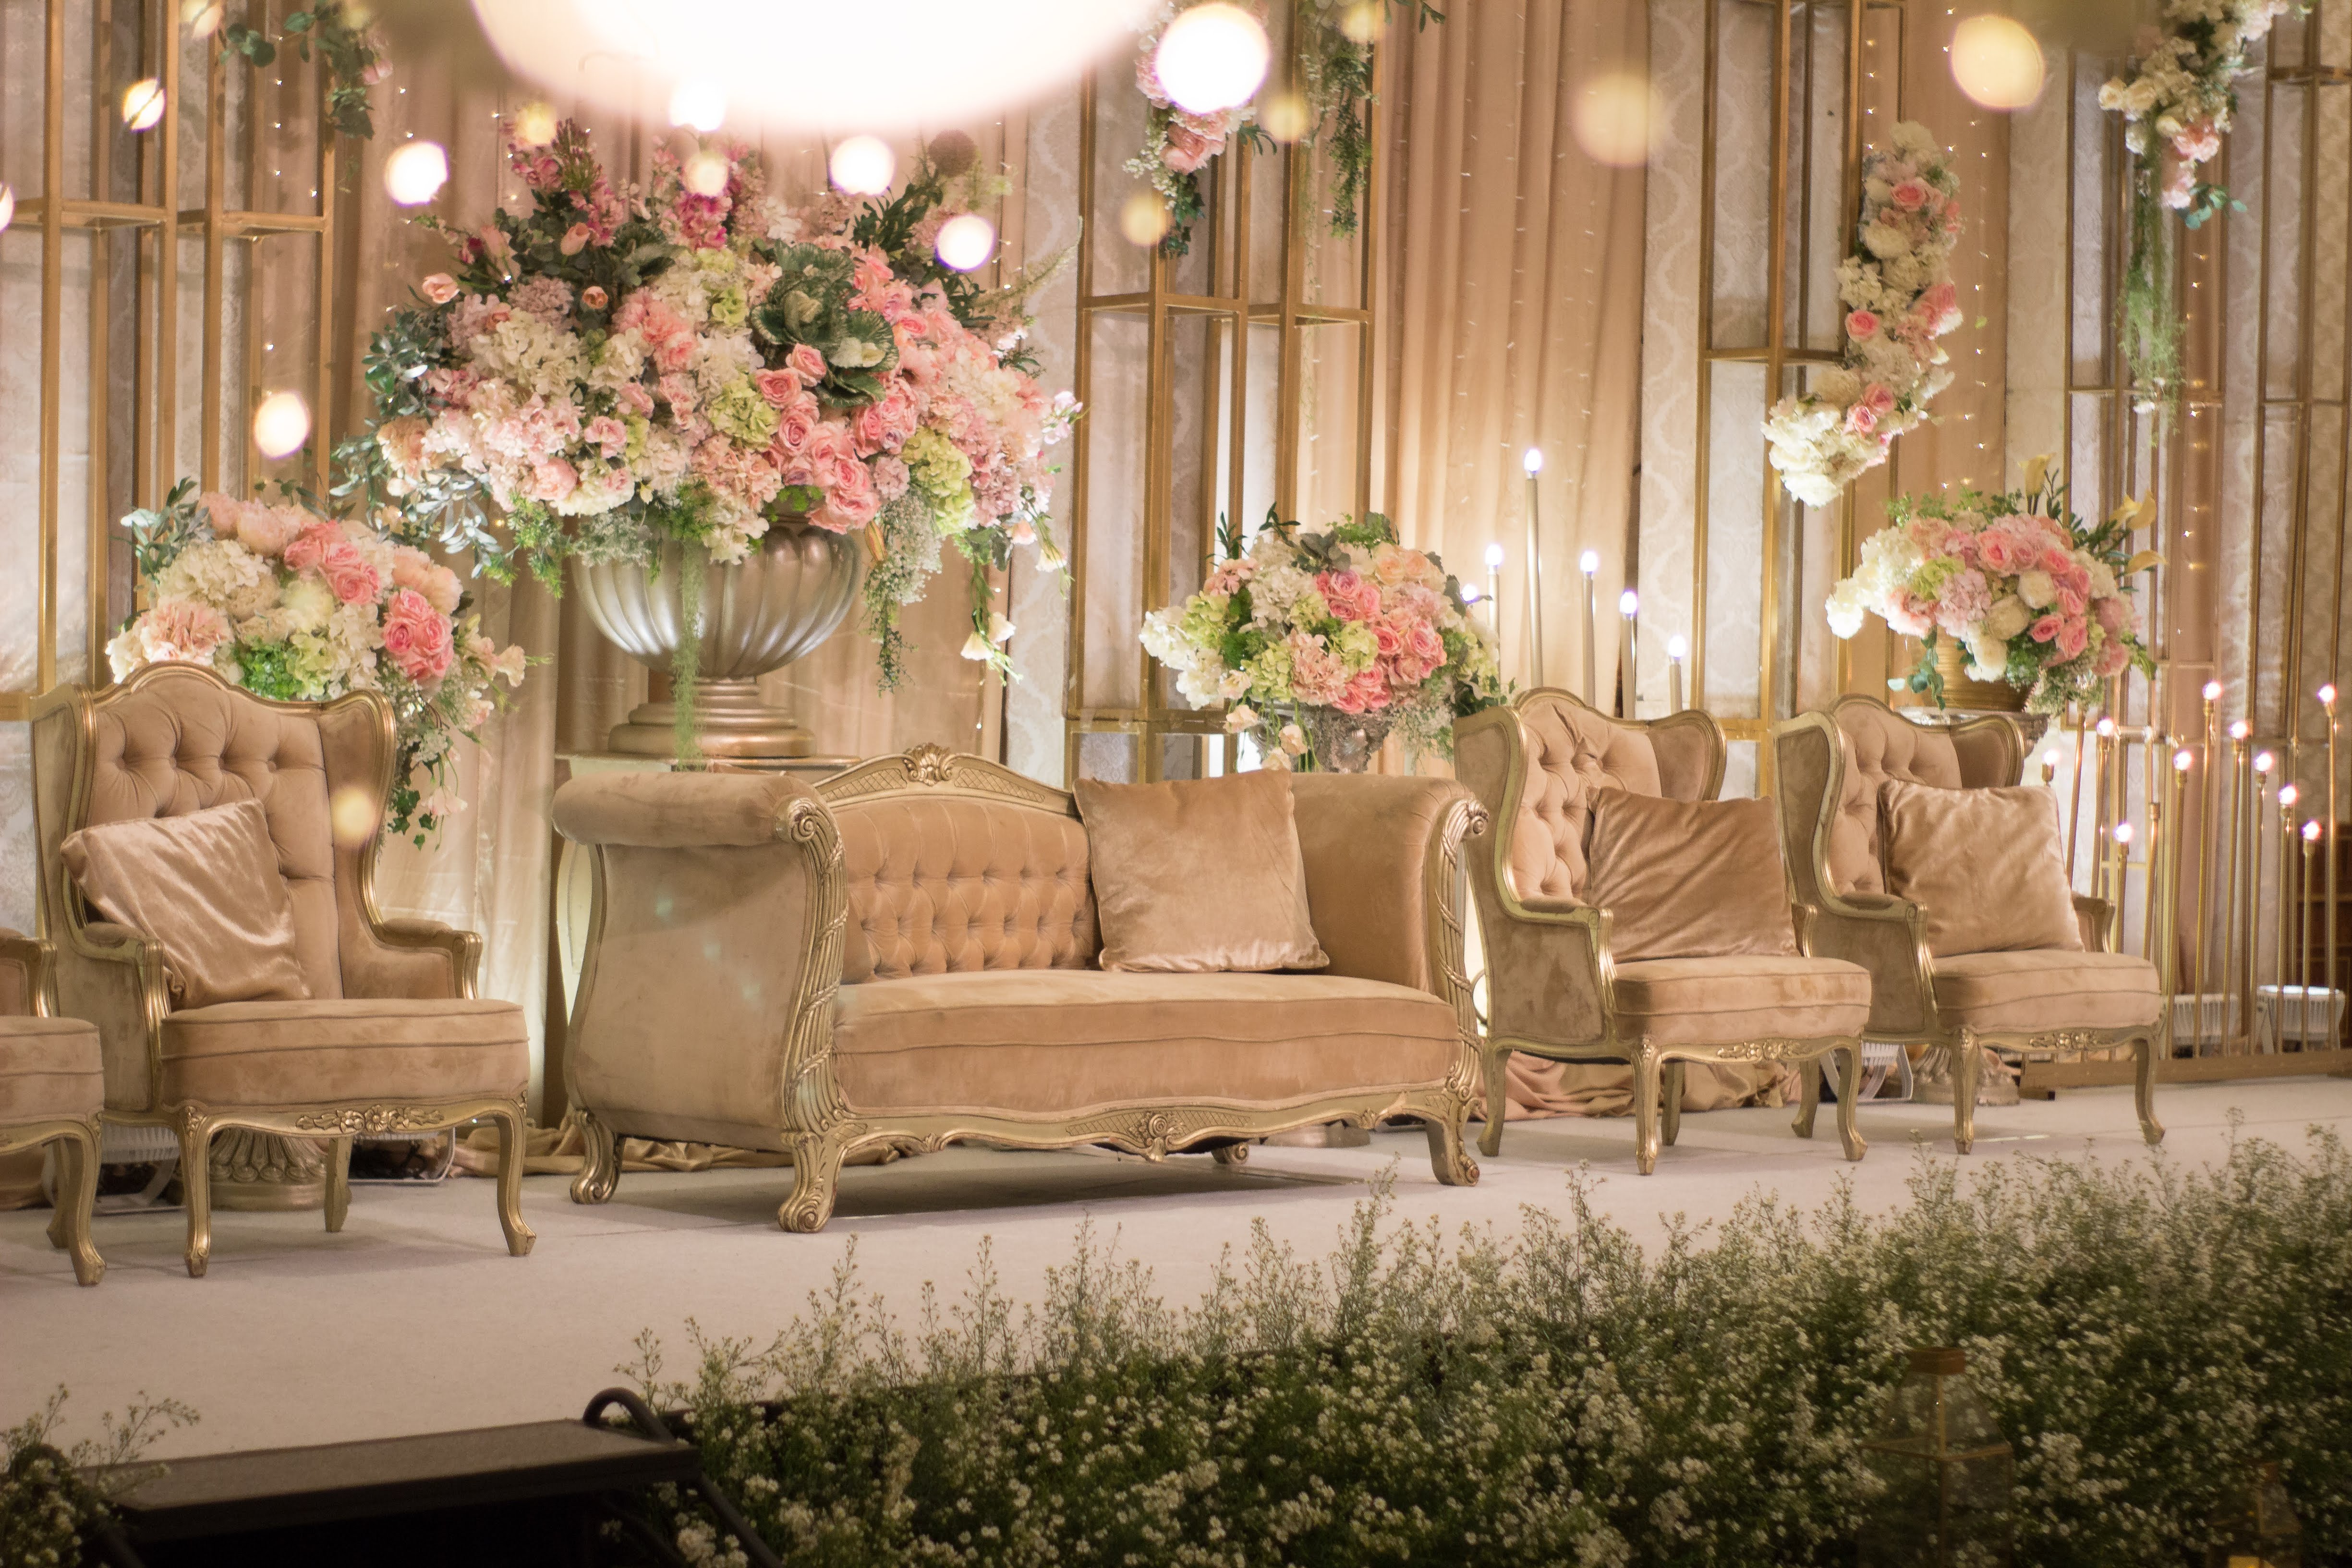 Audrey and Ryan's wedding // Venue at Four Seasons Jakarta // Decoration by Lily  Florist and Decoration // Organised by Partee Organiser // Lighting by Lightworks